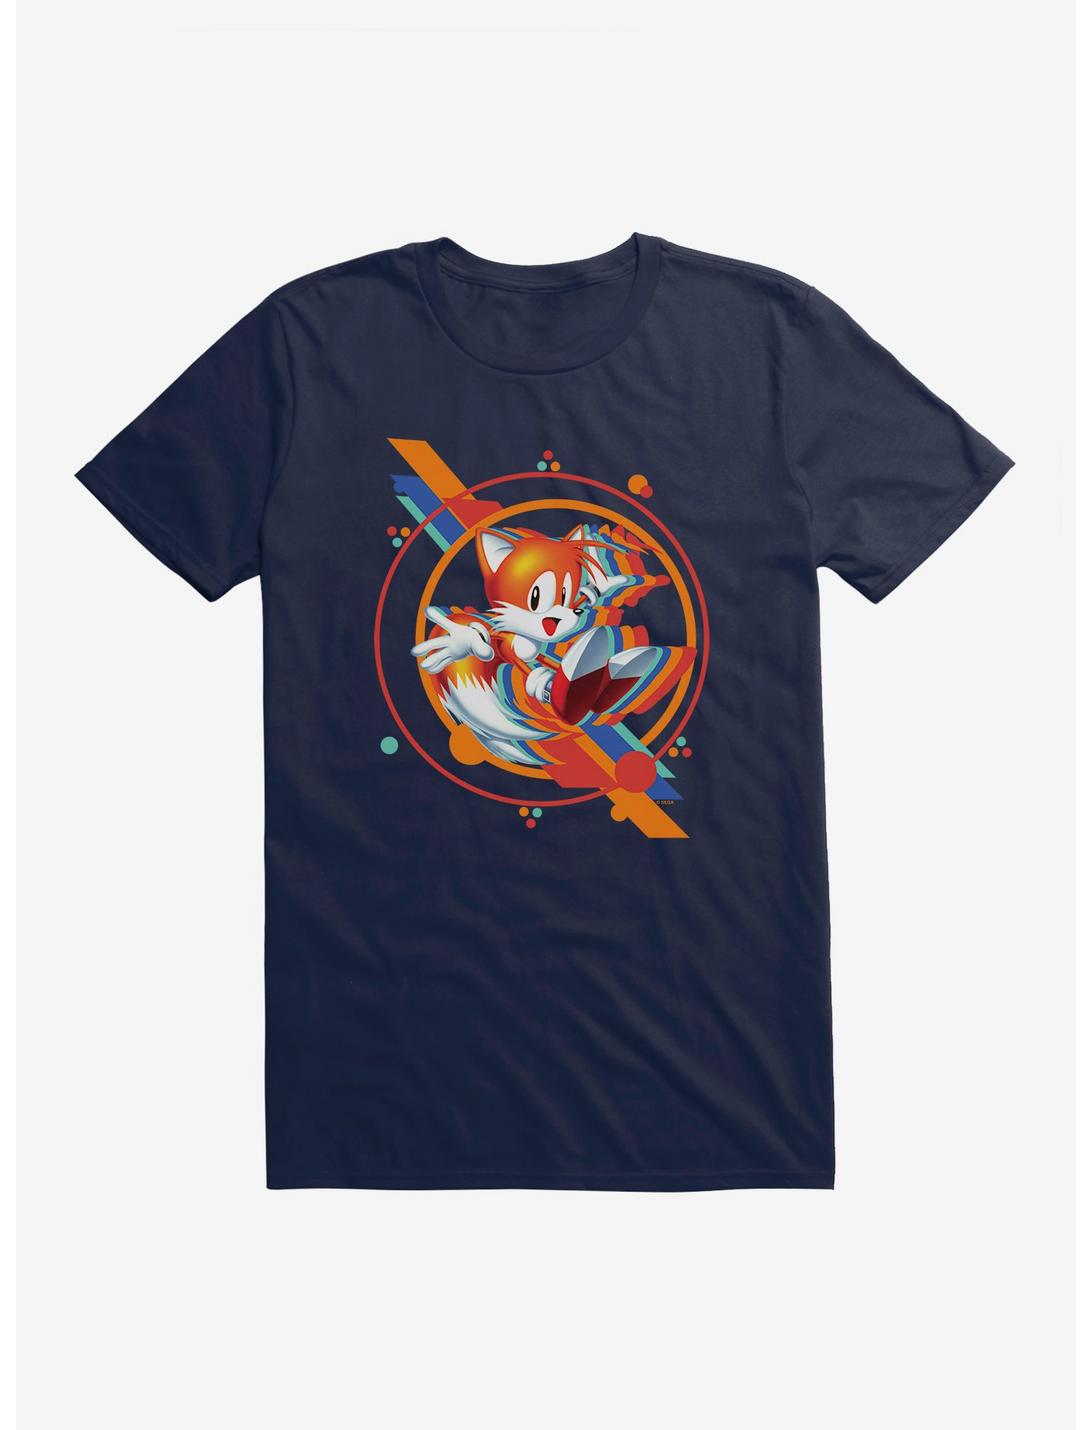 Sonic The Hedgehog Classic Tails T-Shirt, MIDNIGHT NAVY, hi-res